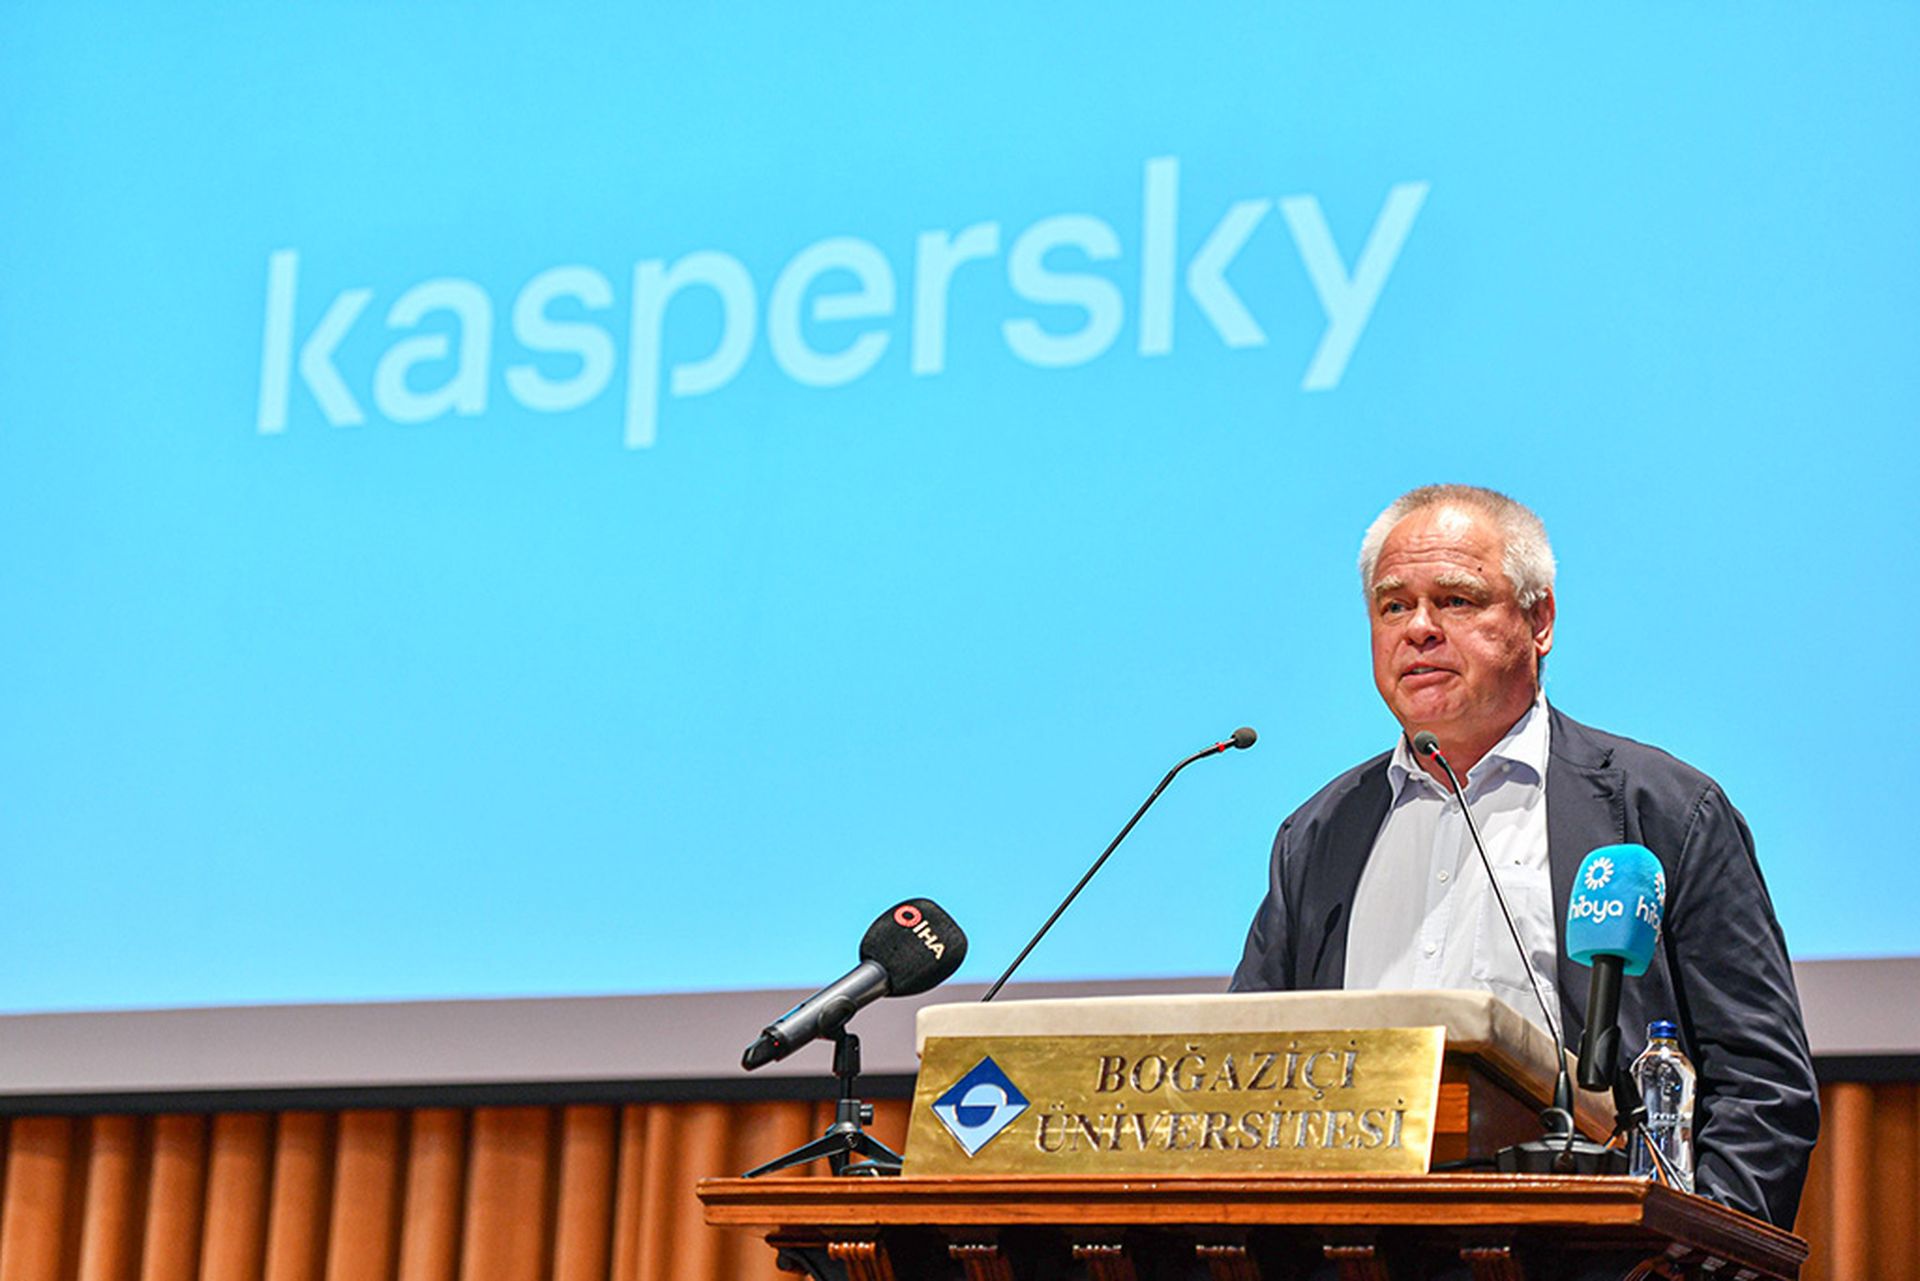 Eugene Kaspersky speaks at a podium in front of a blue screen displaying his company's logo